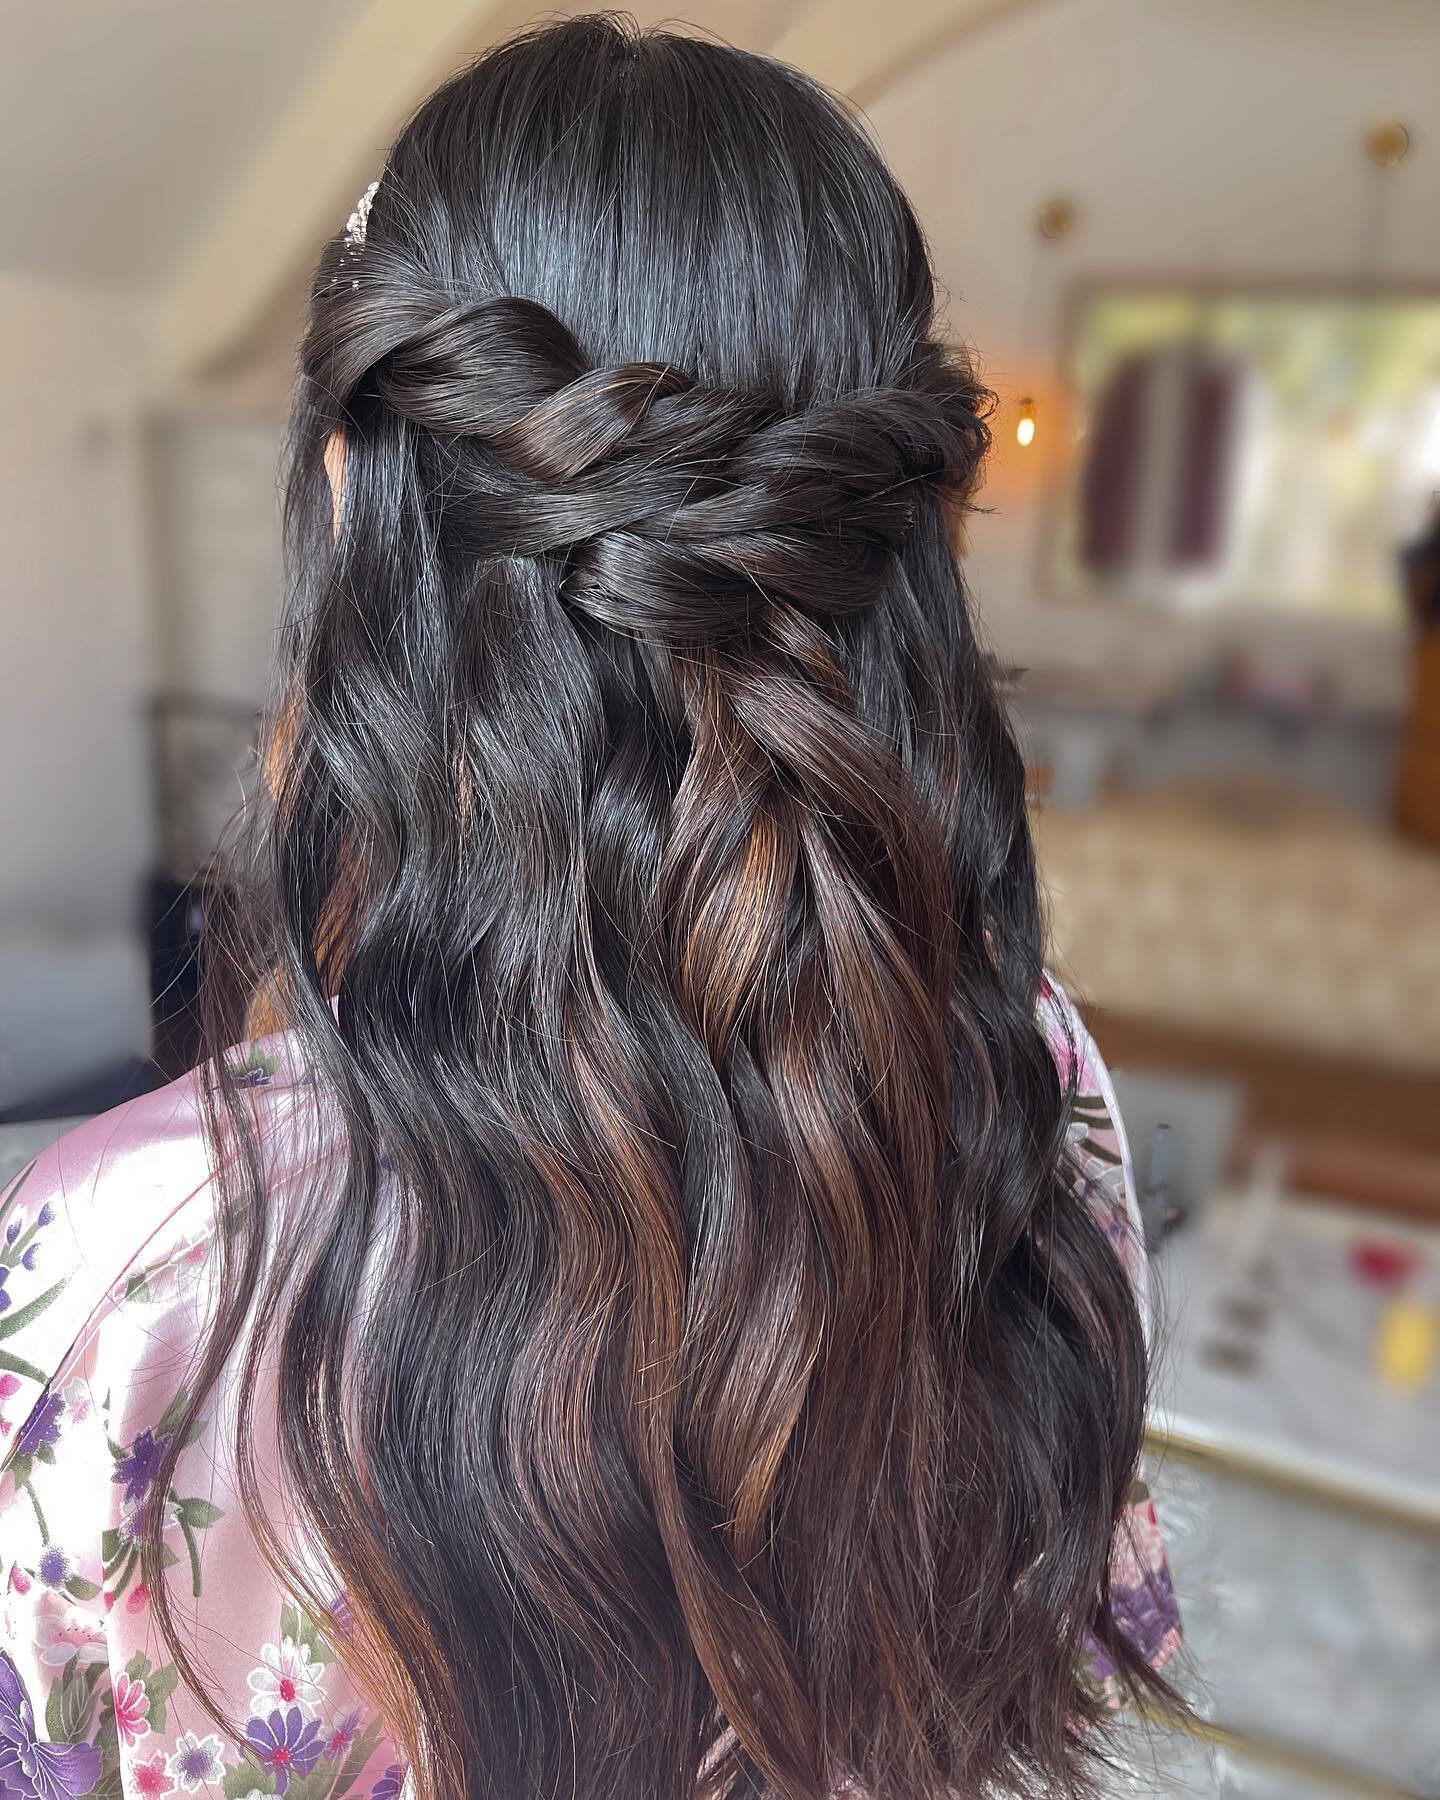 Bridesmaid&rsquo;s hair &mdash; up or down? 

It&rsquo;s a good idea to contrast the bridesmaids&rsquo; style with that of the bride&rsquo;s, but keep the overall idea the same. We absolutely loved this bridesmaid&rsquo;s do. Swipe to see the makeup!